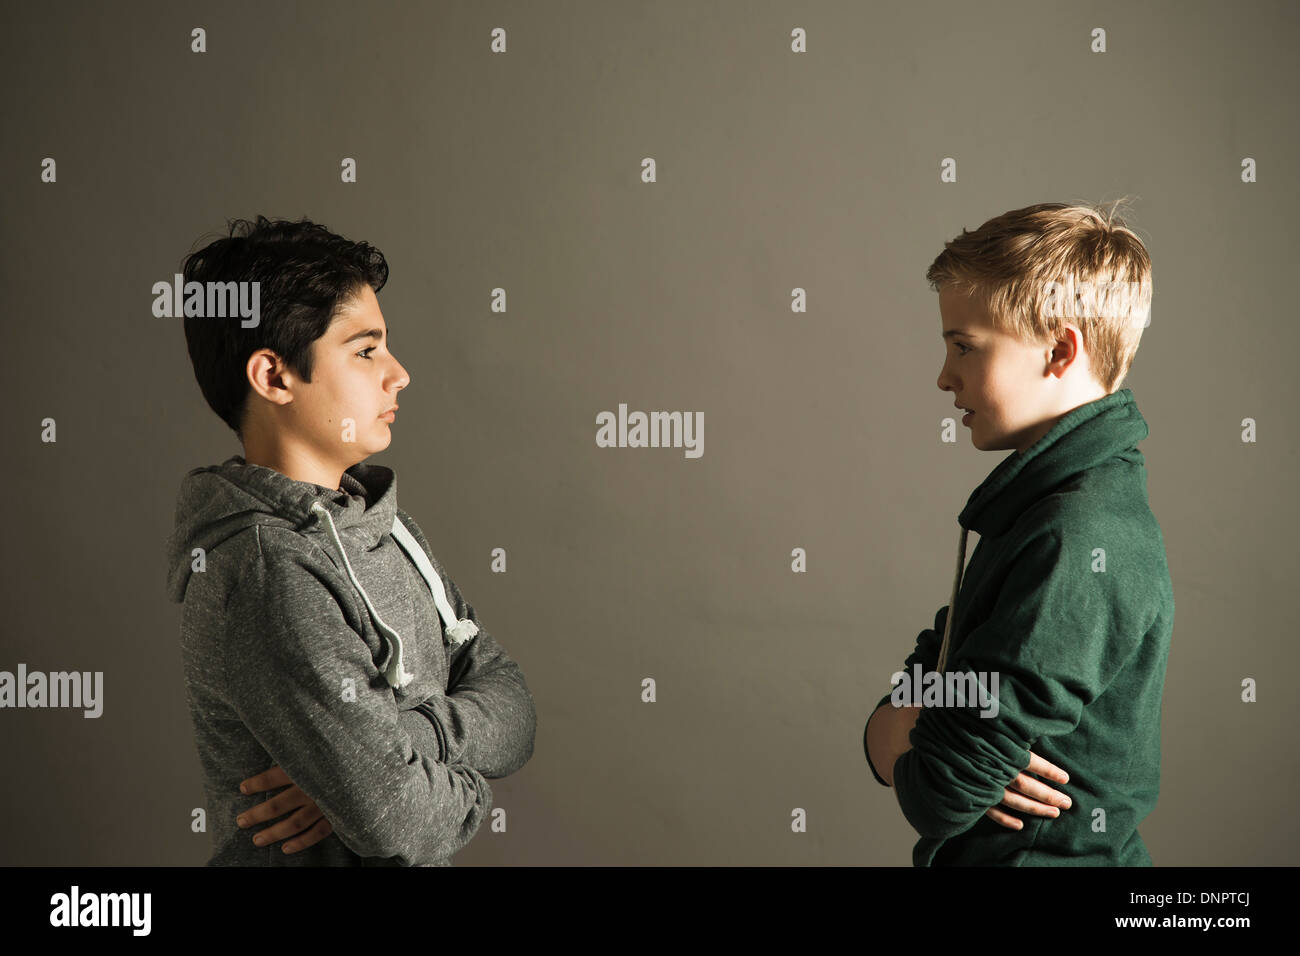 Teenage Boys with Arms Crossed looking at Each Other, Studio Shot Stock Photo